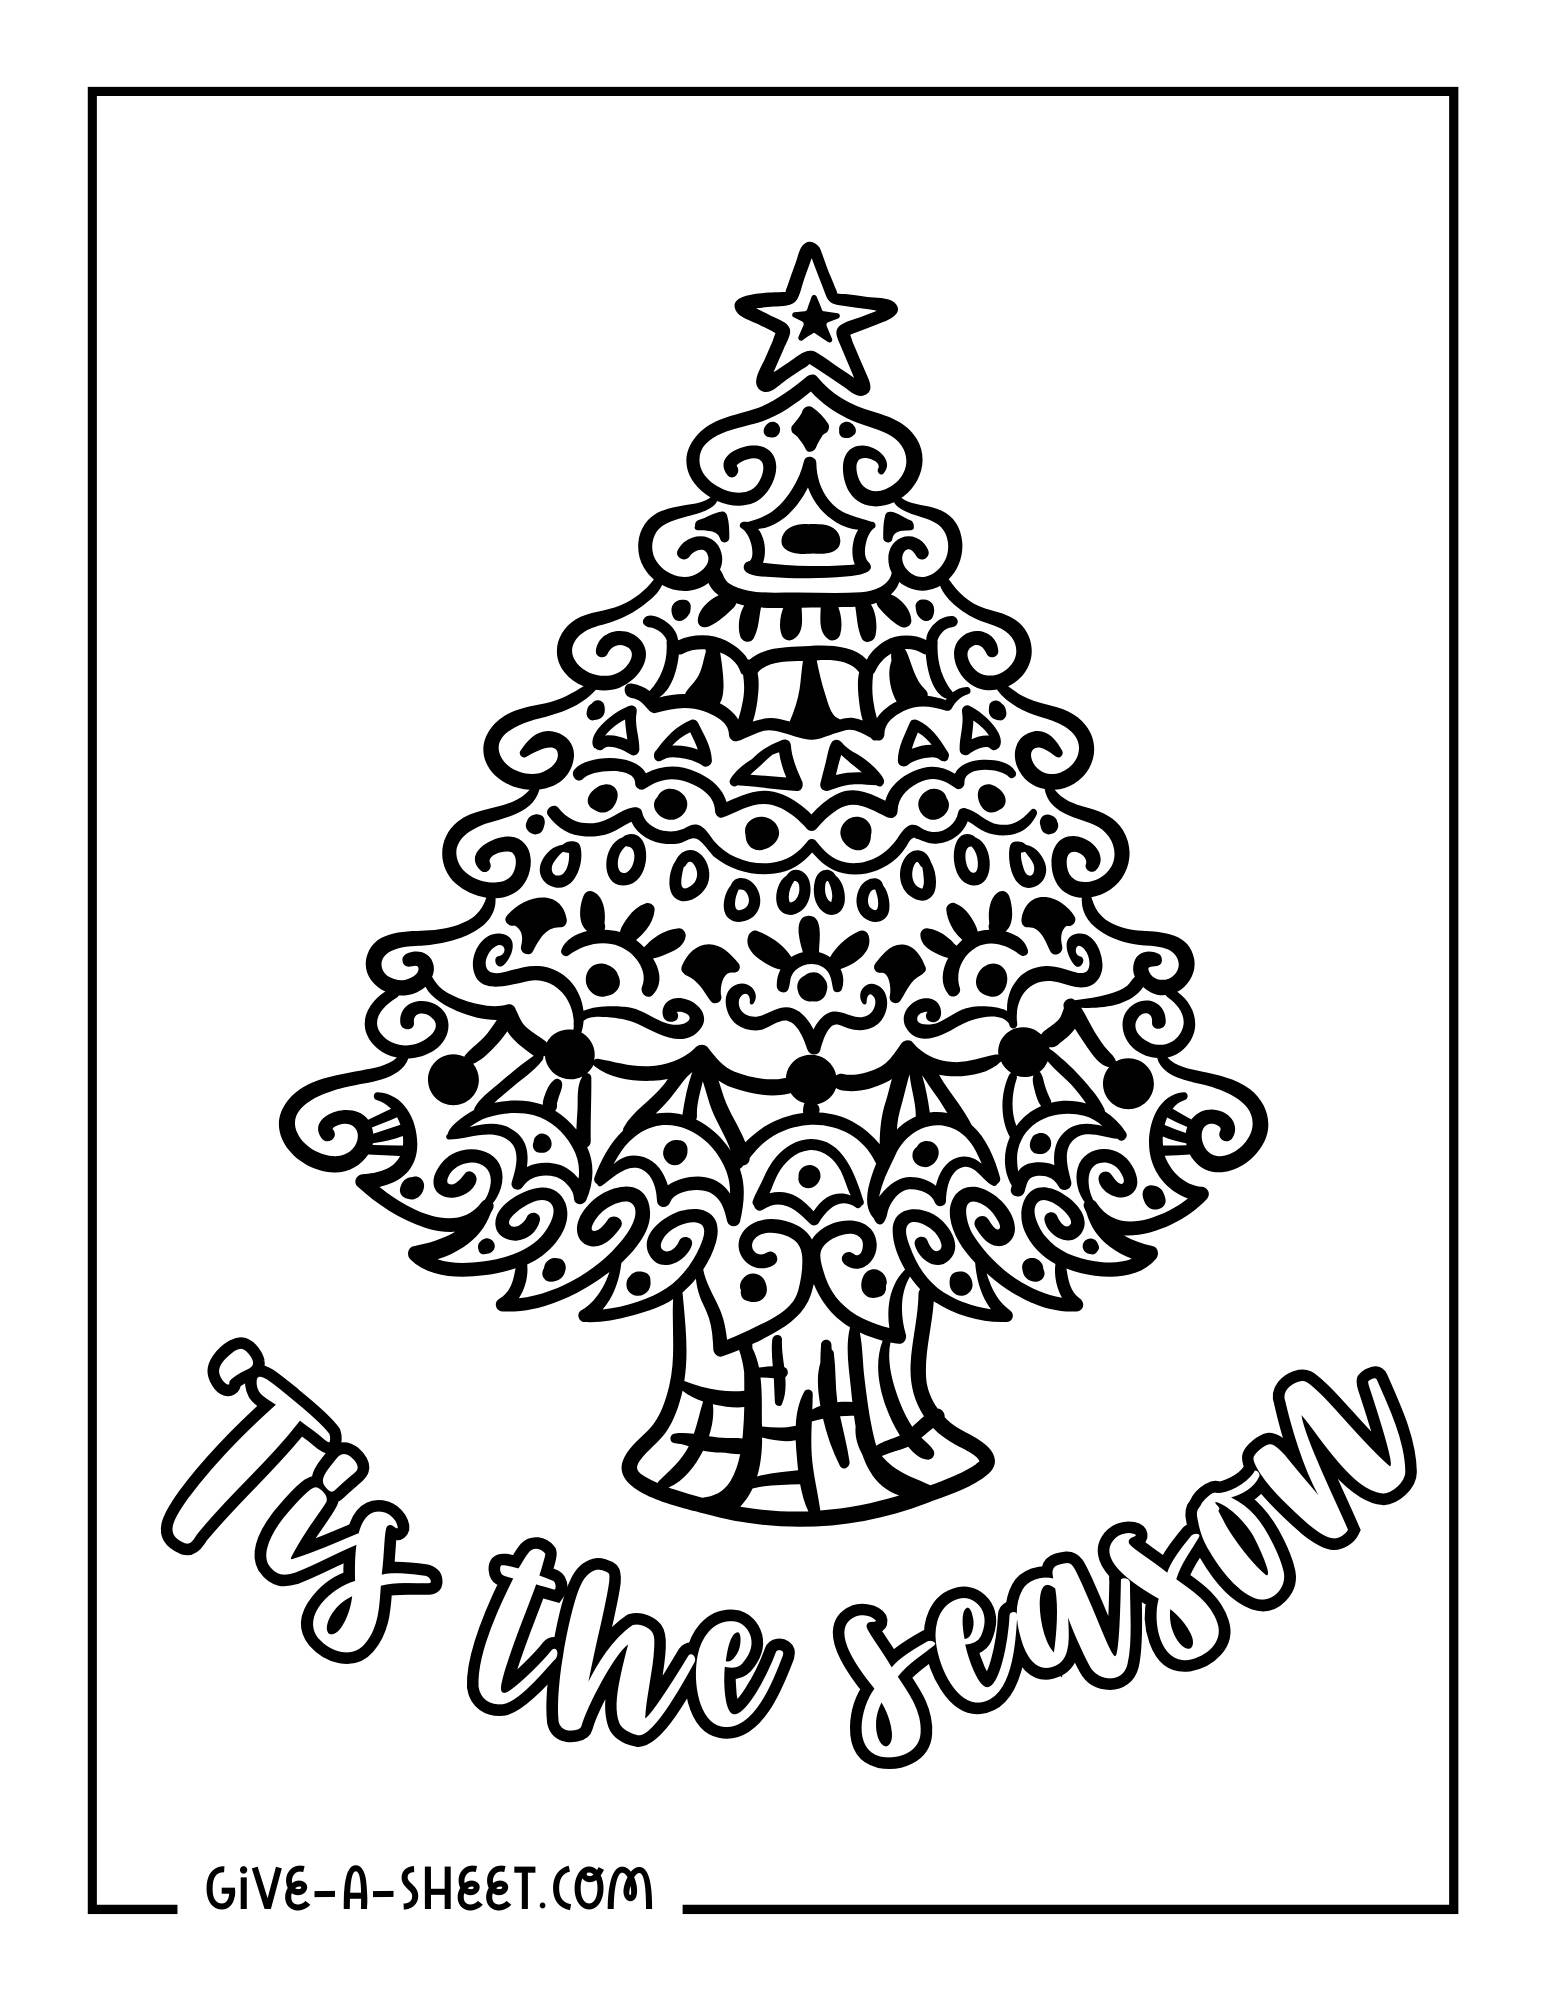 Ornate Christmas tree designs coloring page.